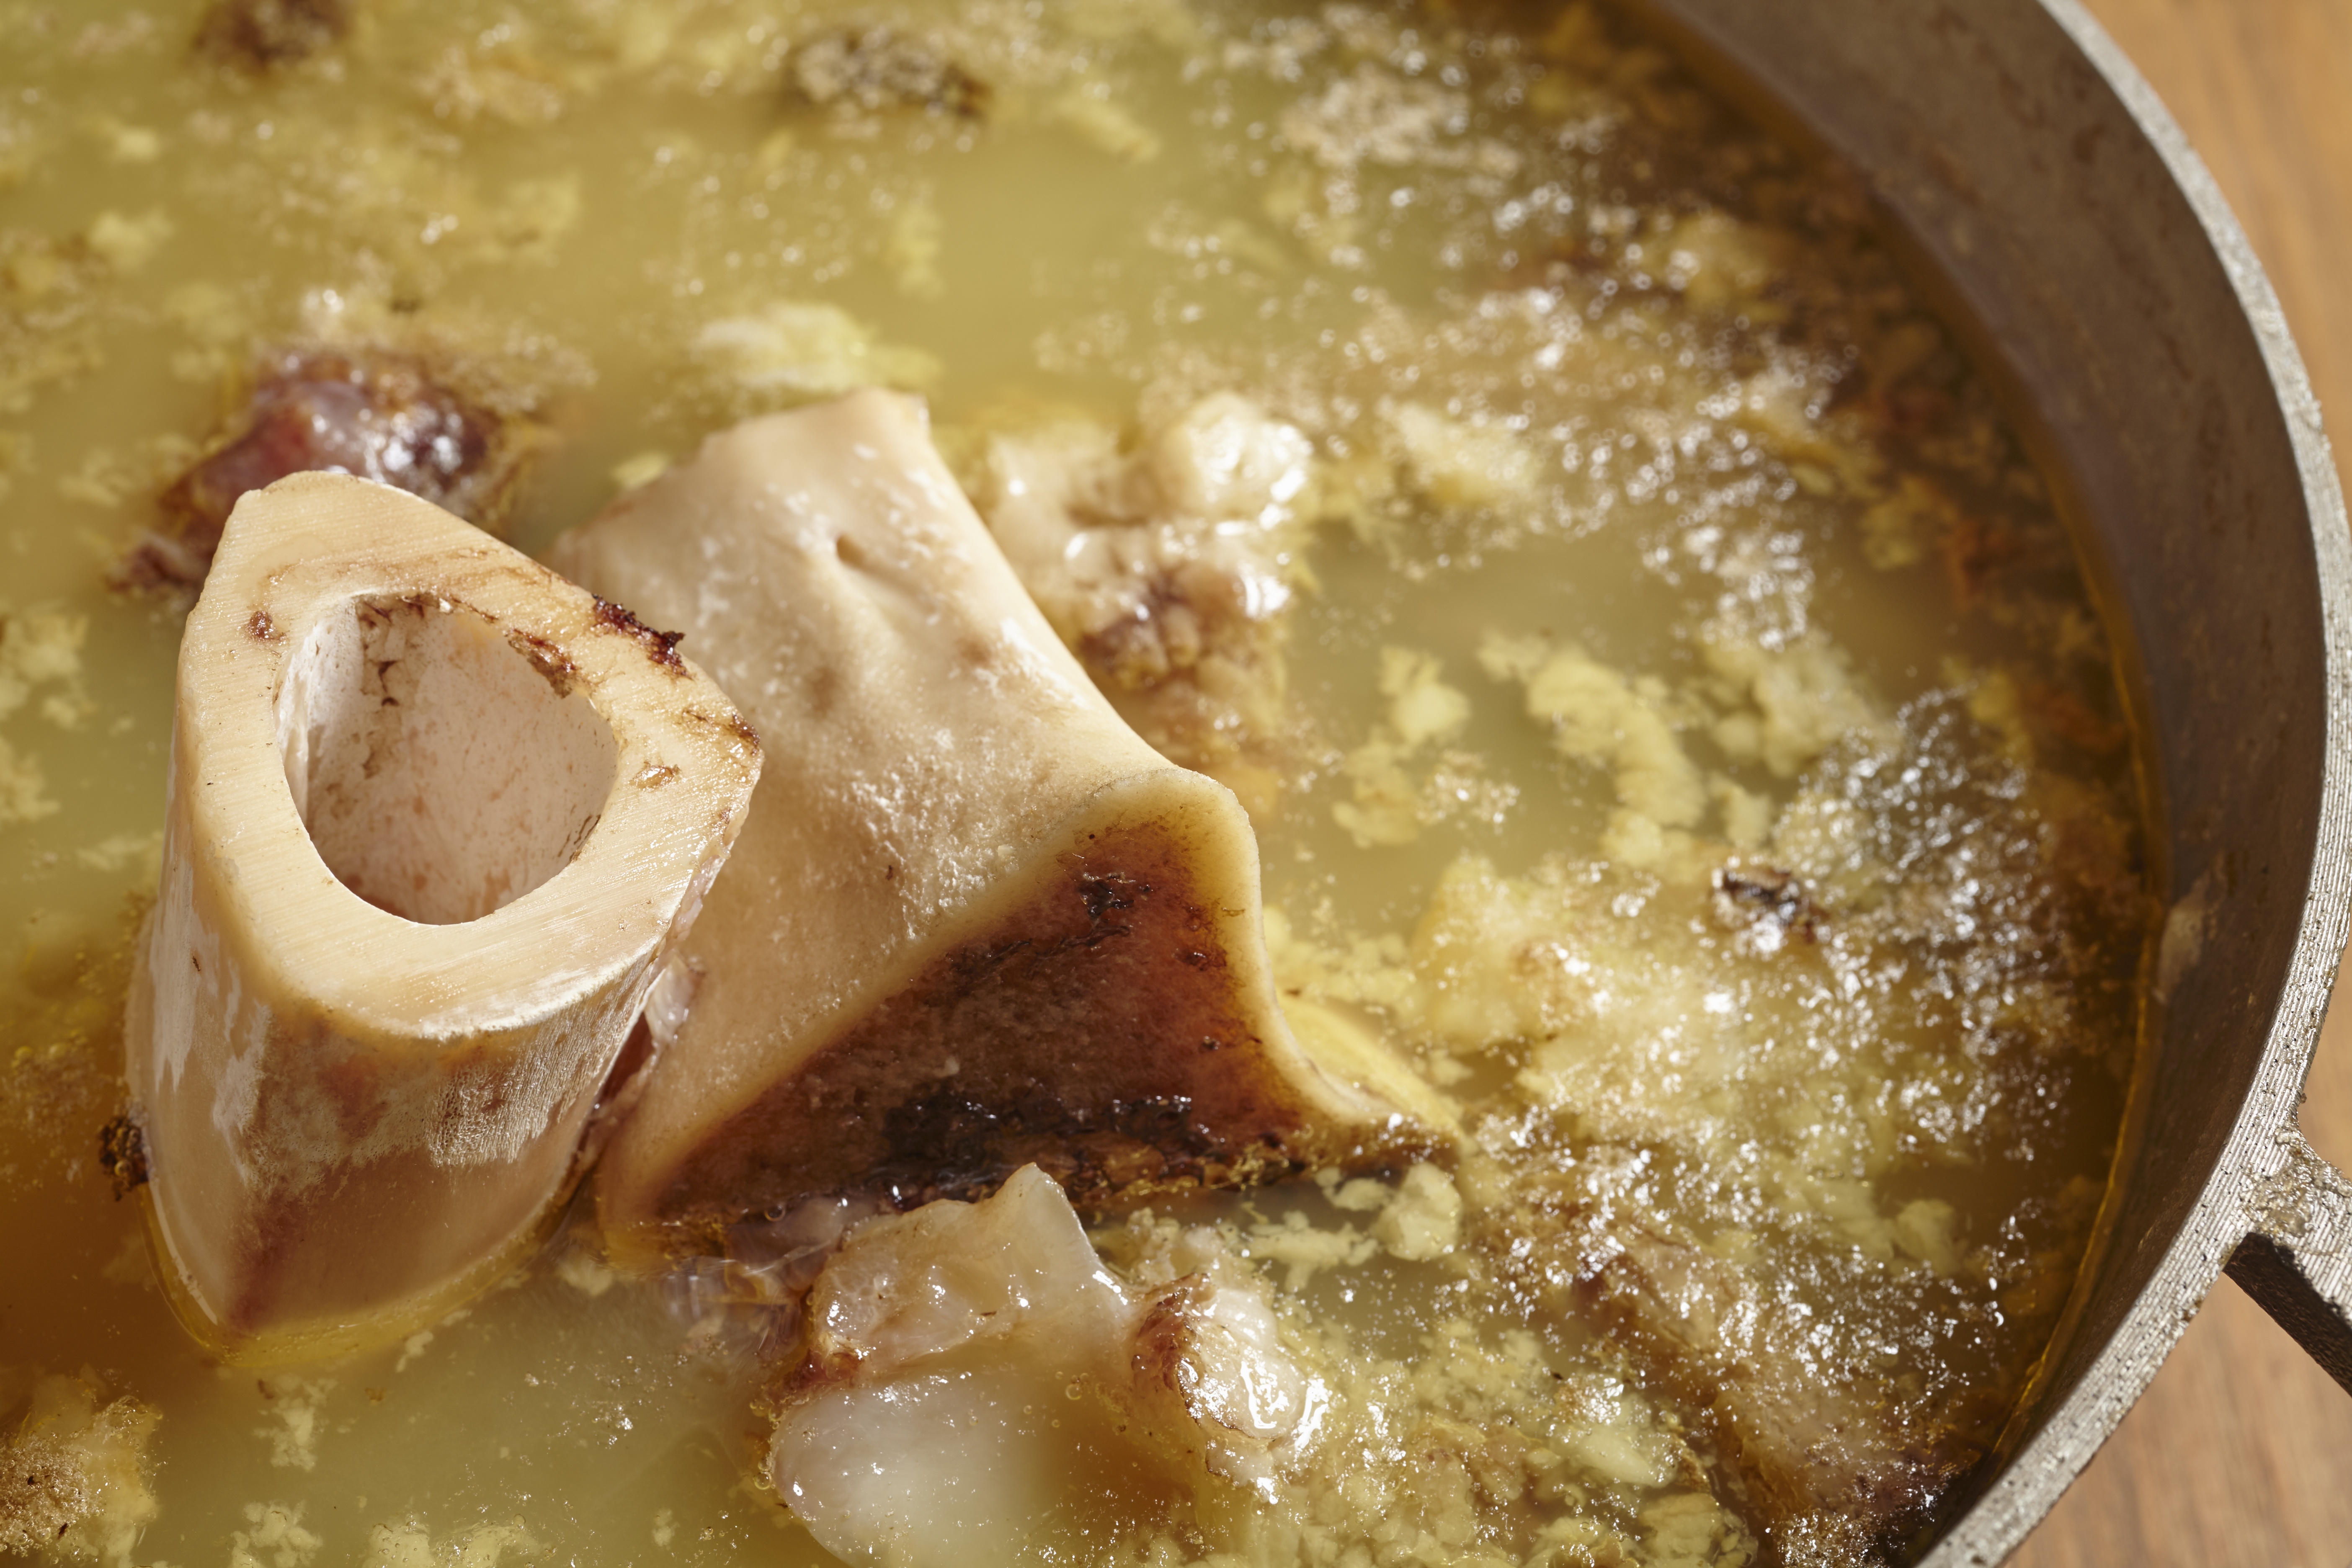 What is The Benefit of Drinking Bone Broth?